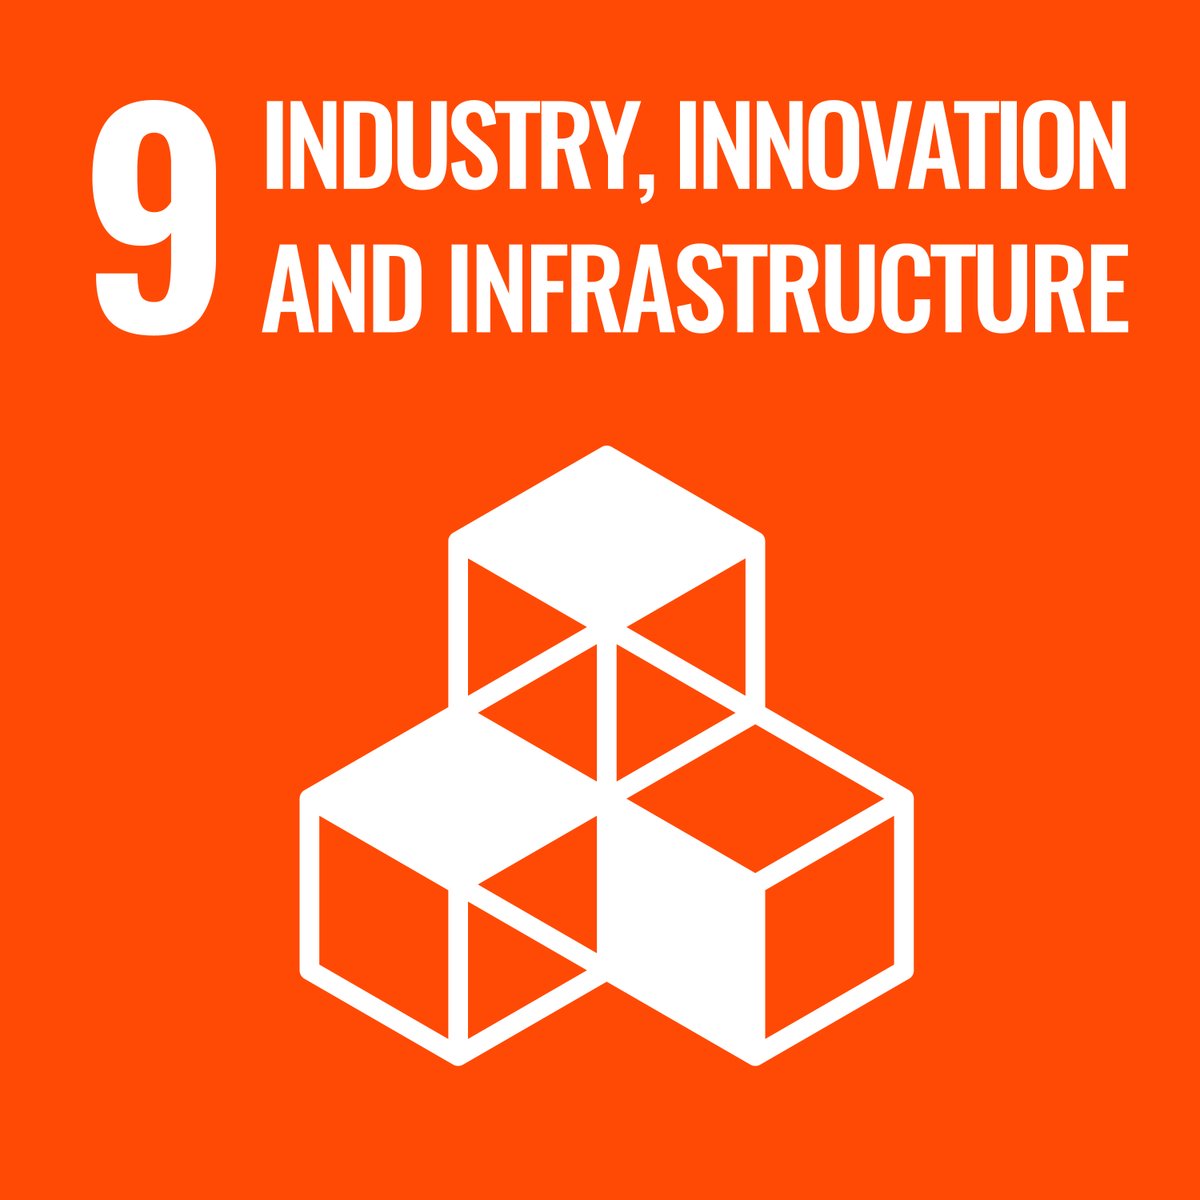 GOAL 9: INDUSTRY, INNOVATION AND INFRASTRUCTURE WHY IT MATTERS Economic #growth, social development and climate action are heavily dependent on investments in infrastructure, sustainable industrial development and technological progress. @UNStats @SustDev